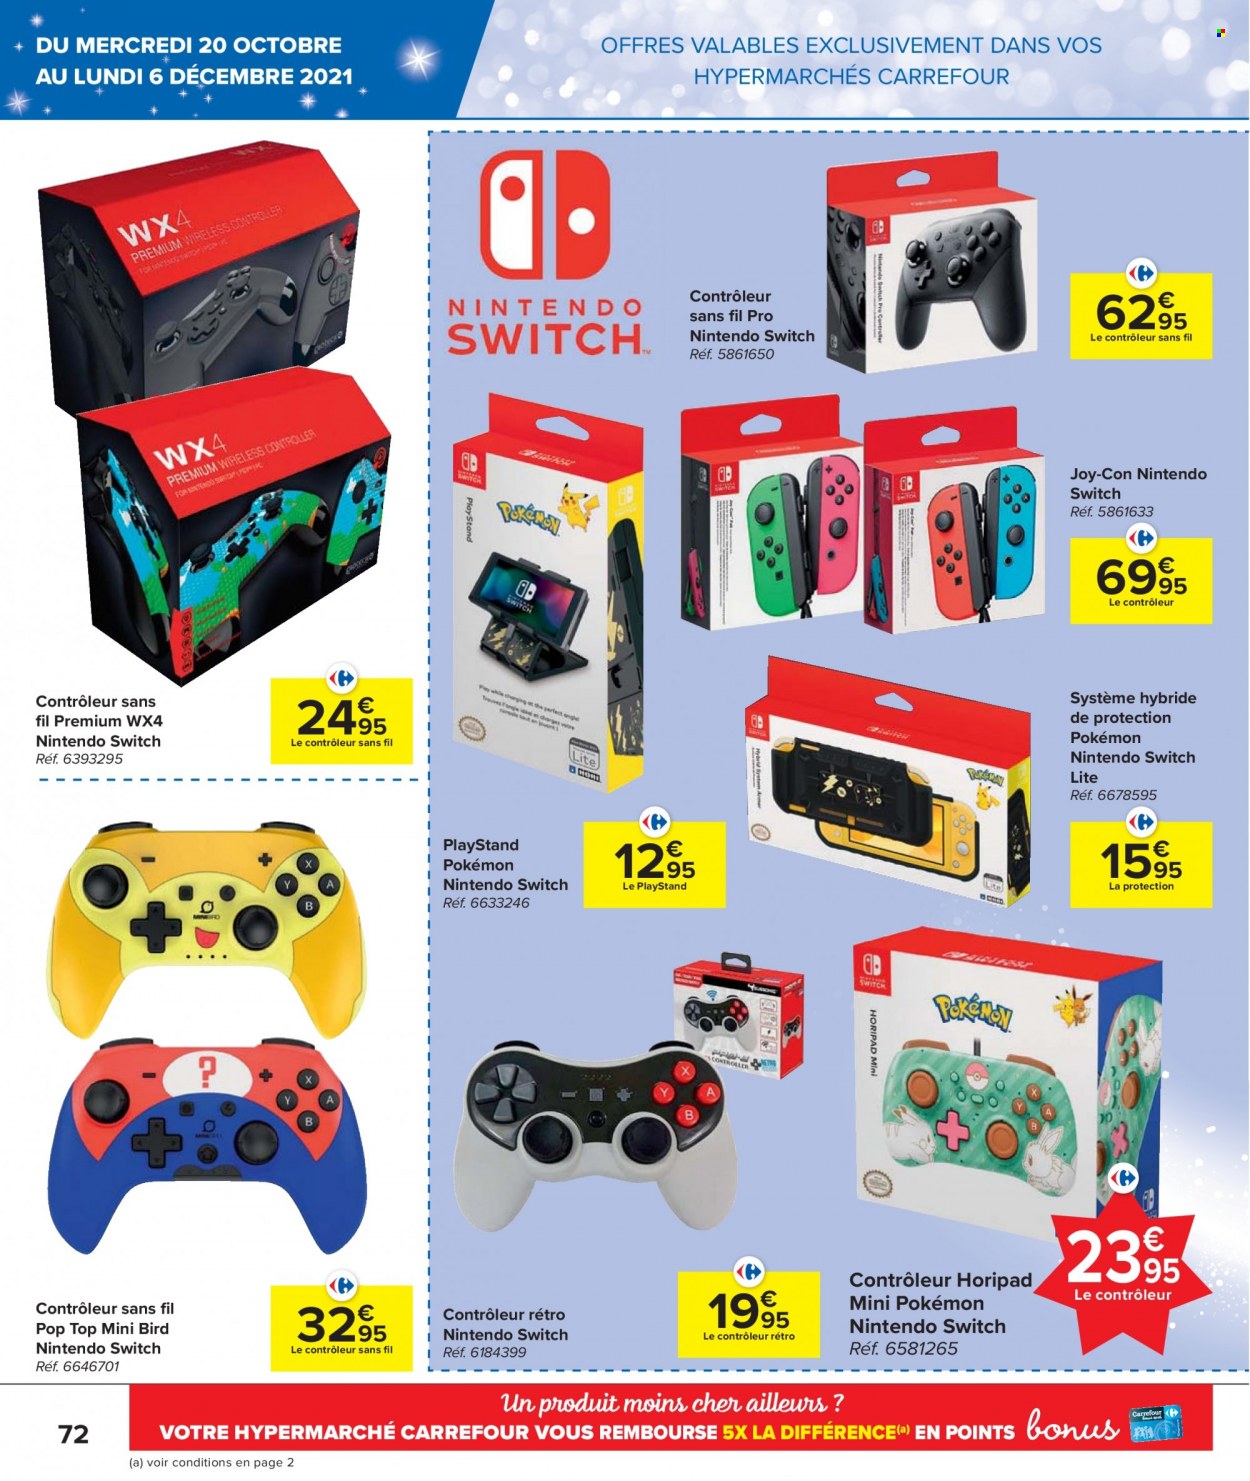 Catalogue Carrefour hypermarkt - 20.10.2021 - 6.12.2021. Page 72.